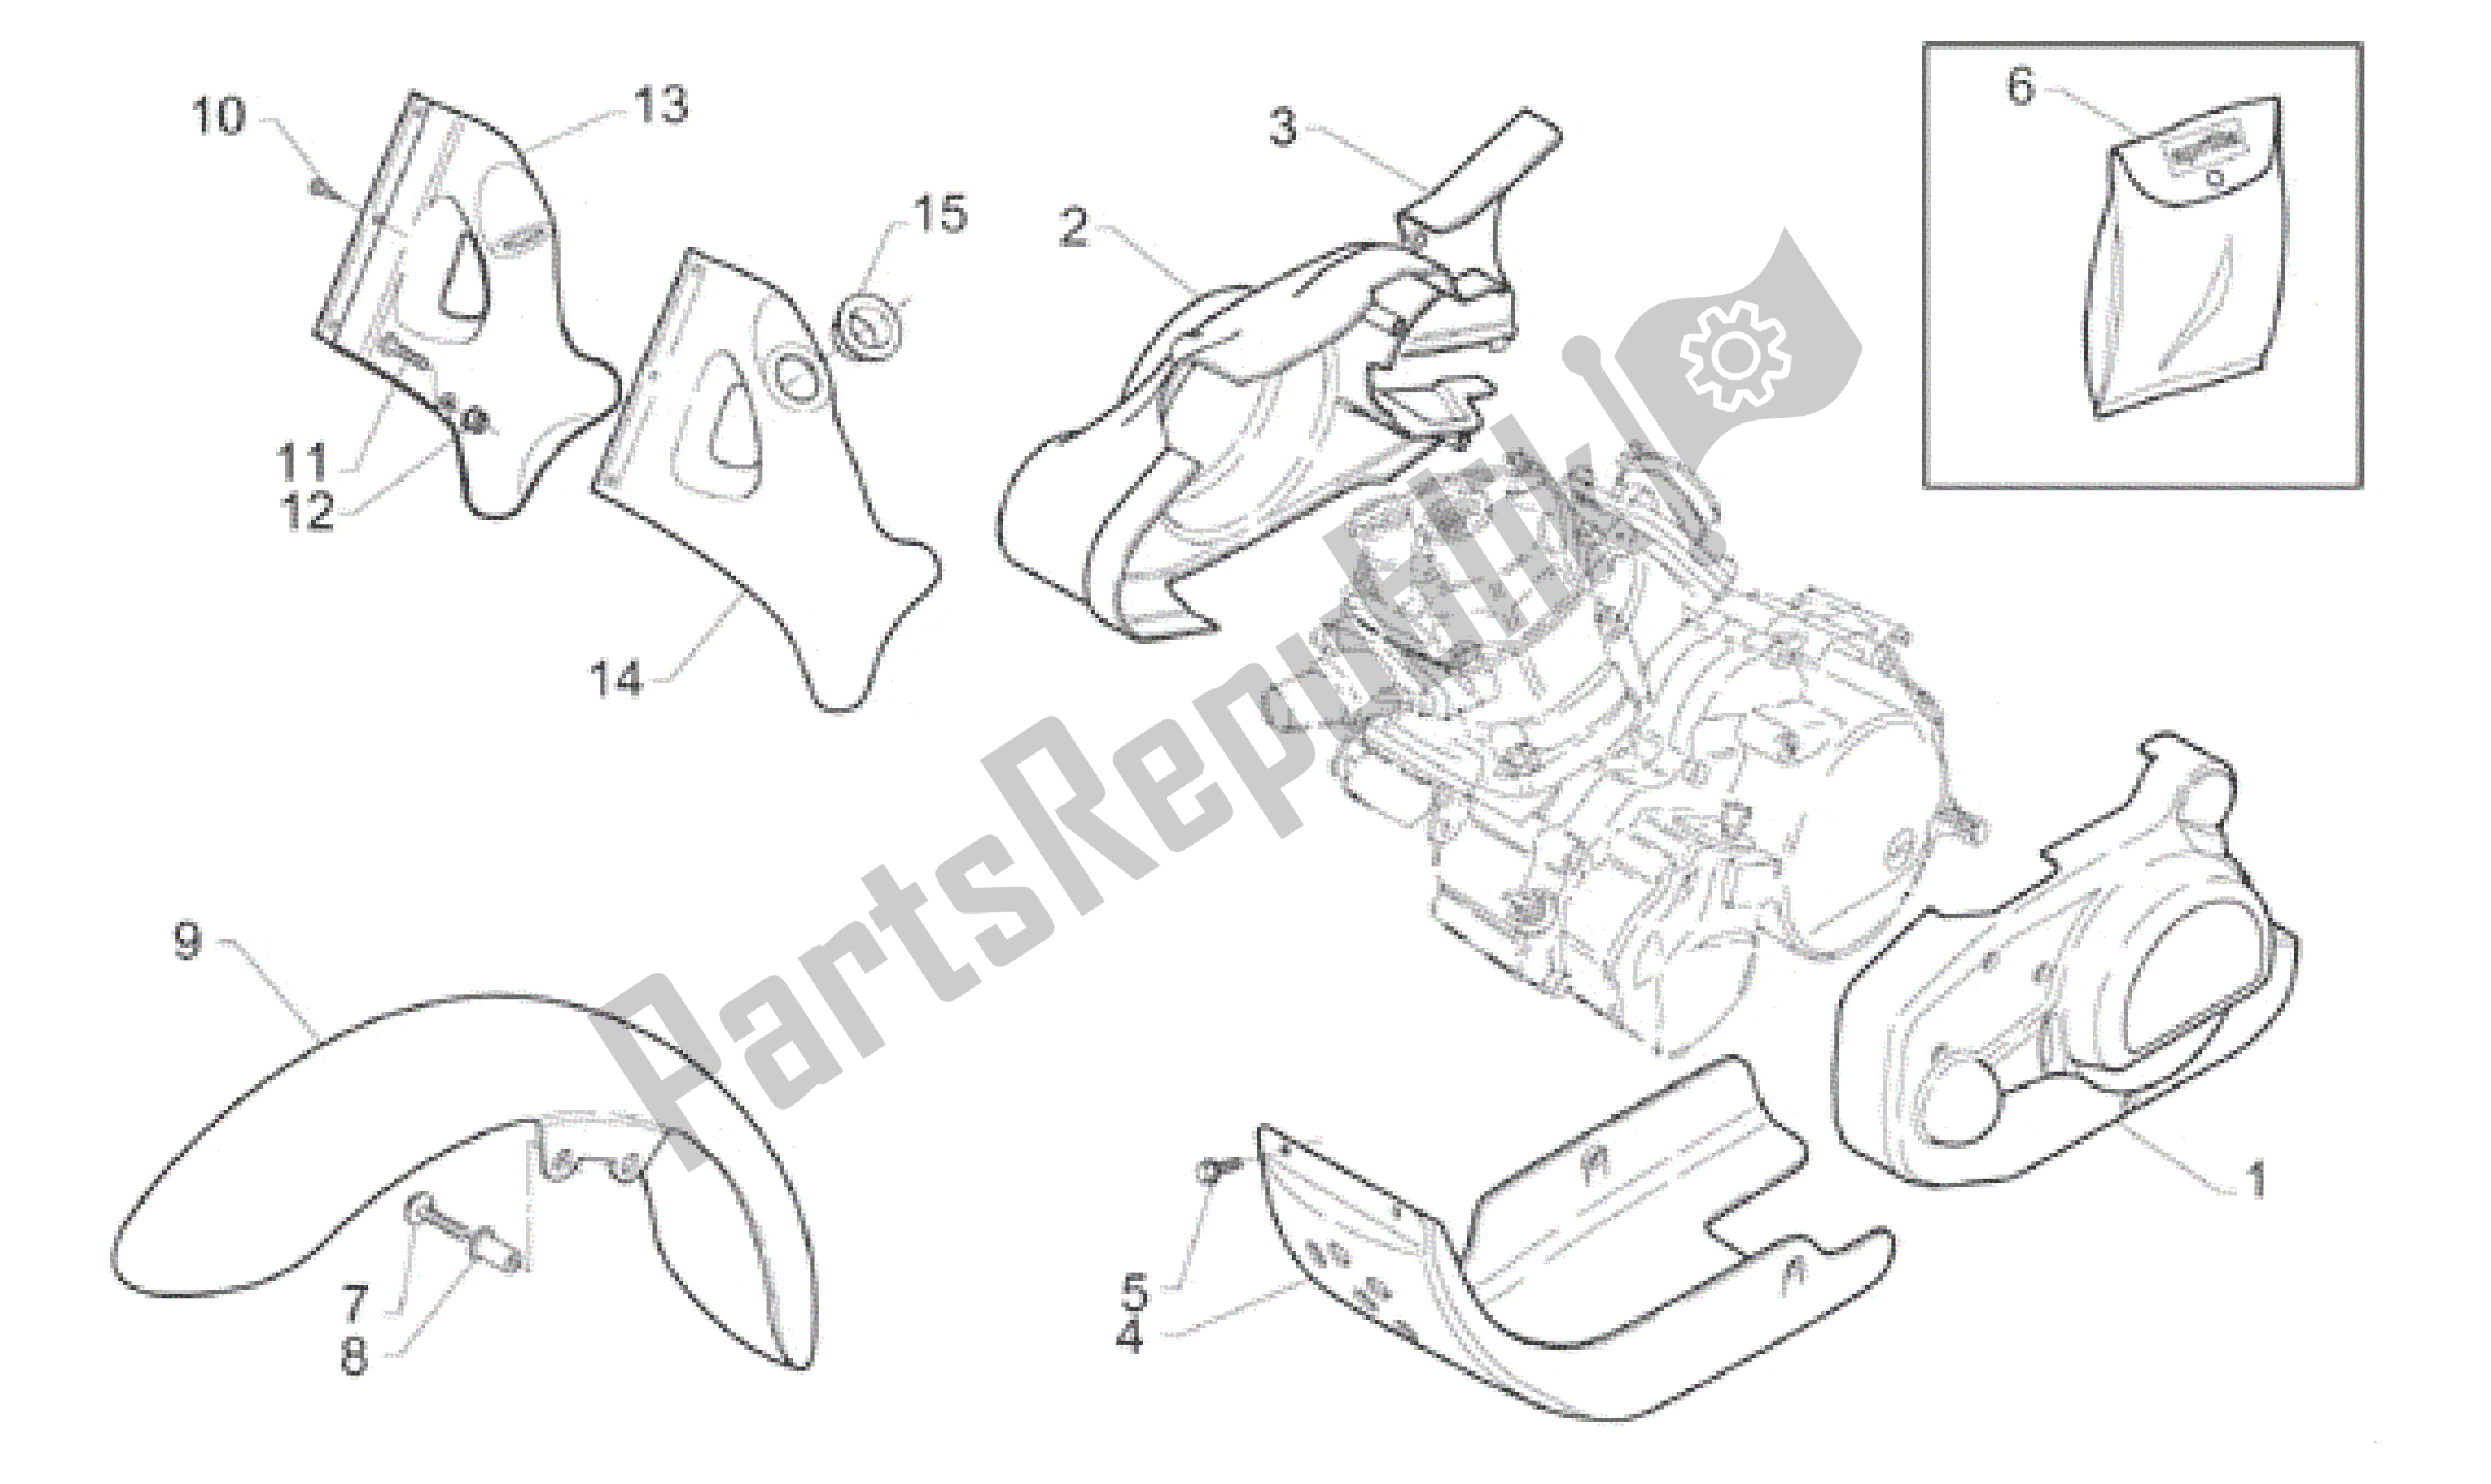 All parts for the Front Body of the Aprilia Classic 125 1995 - 1999